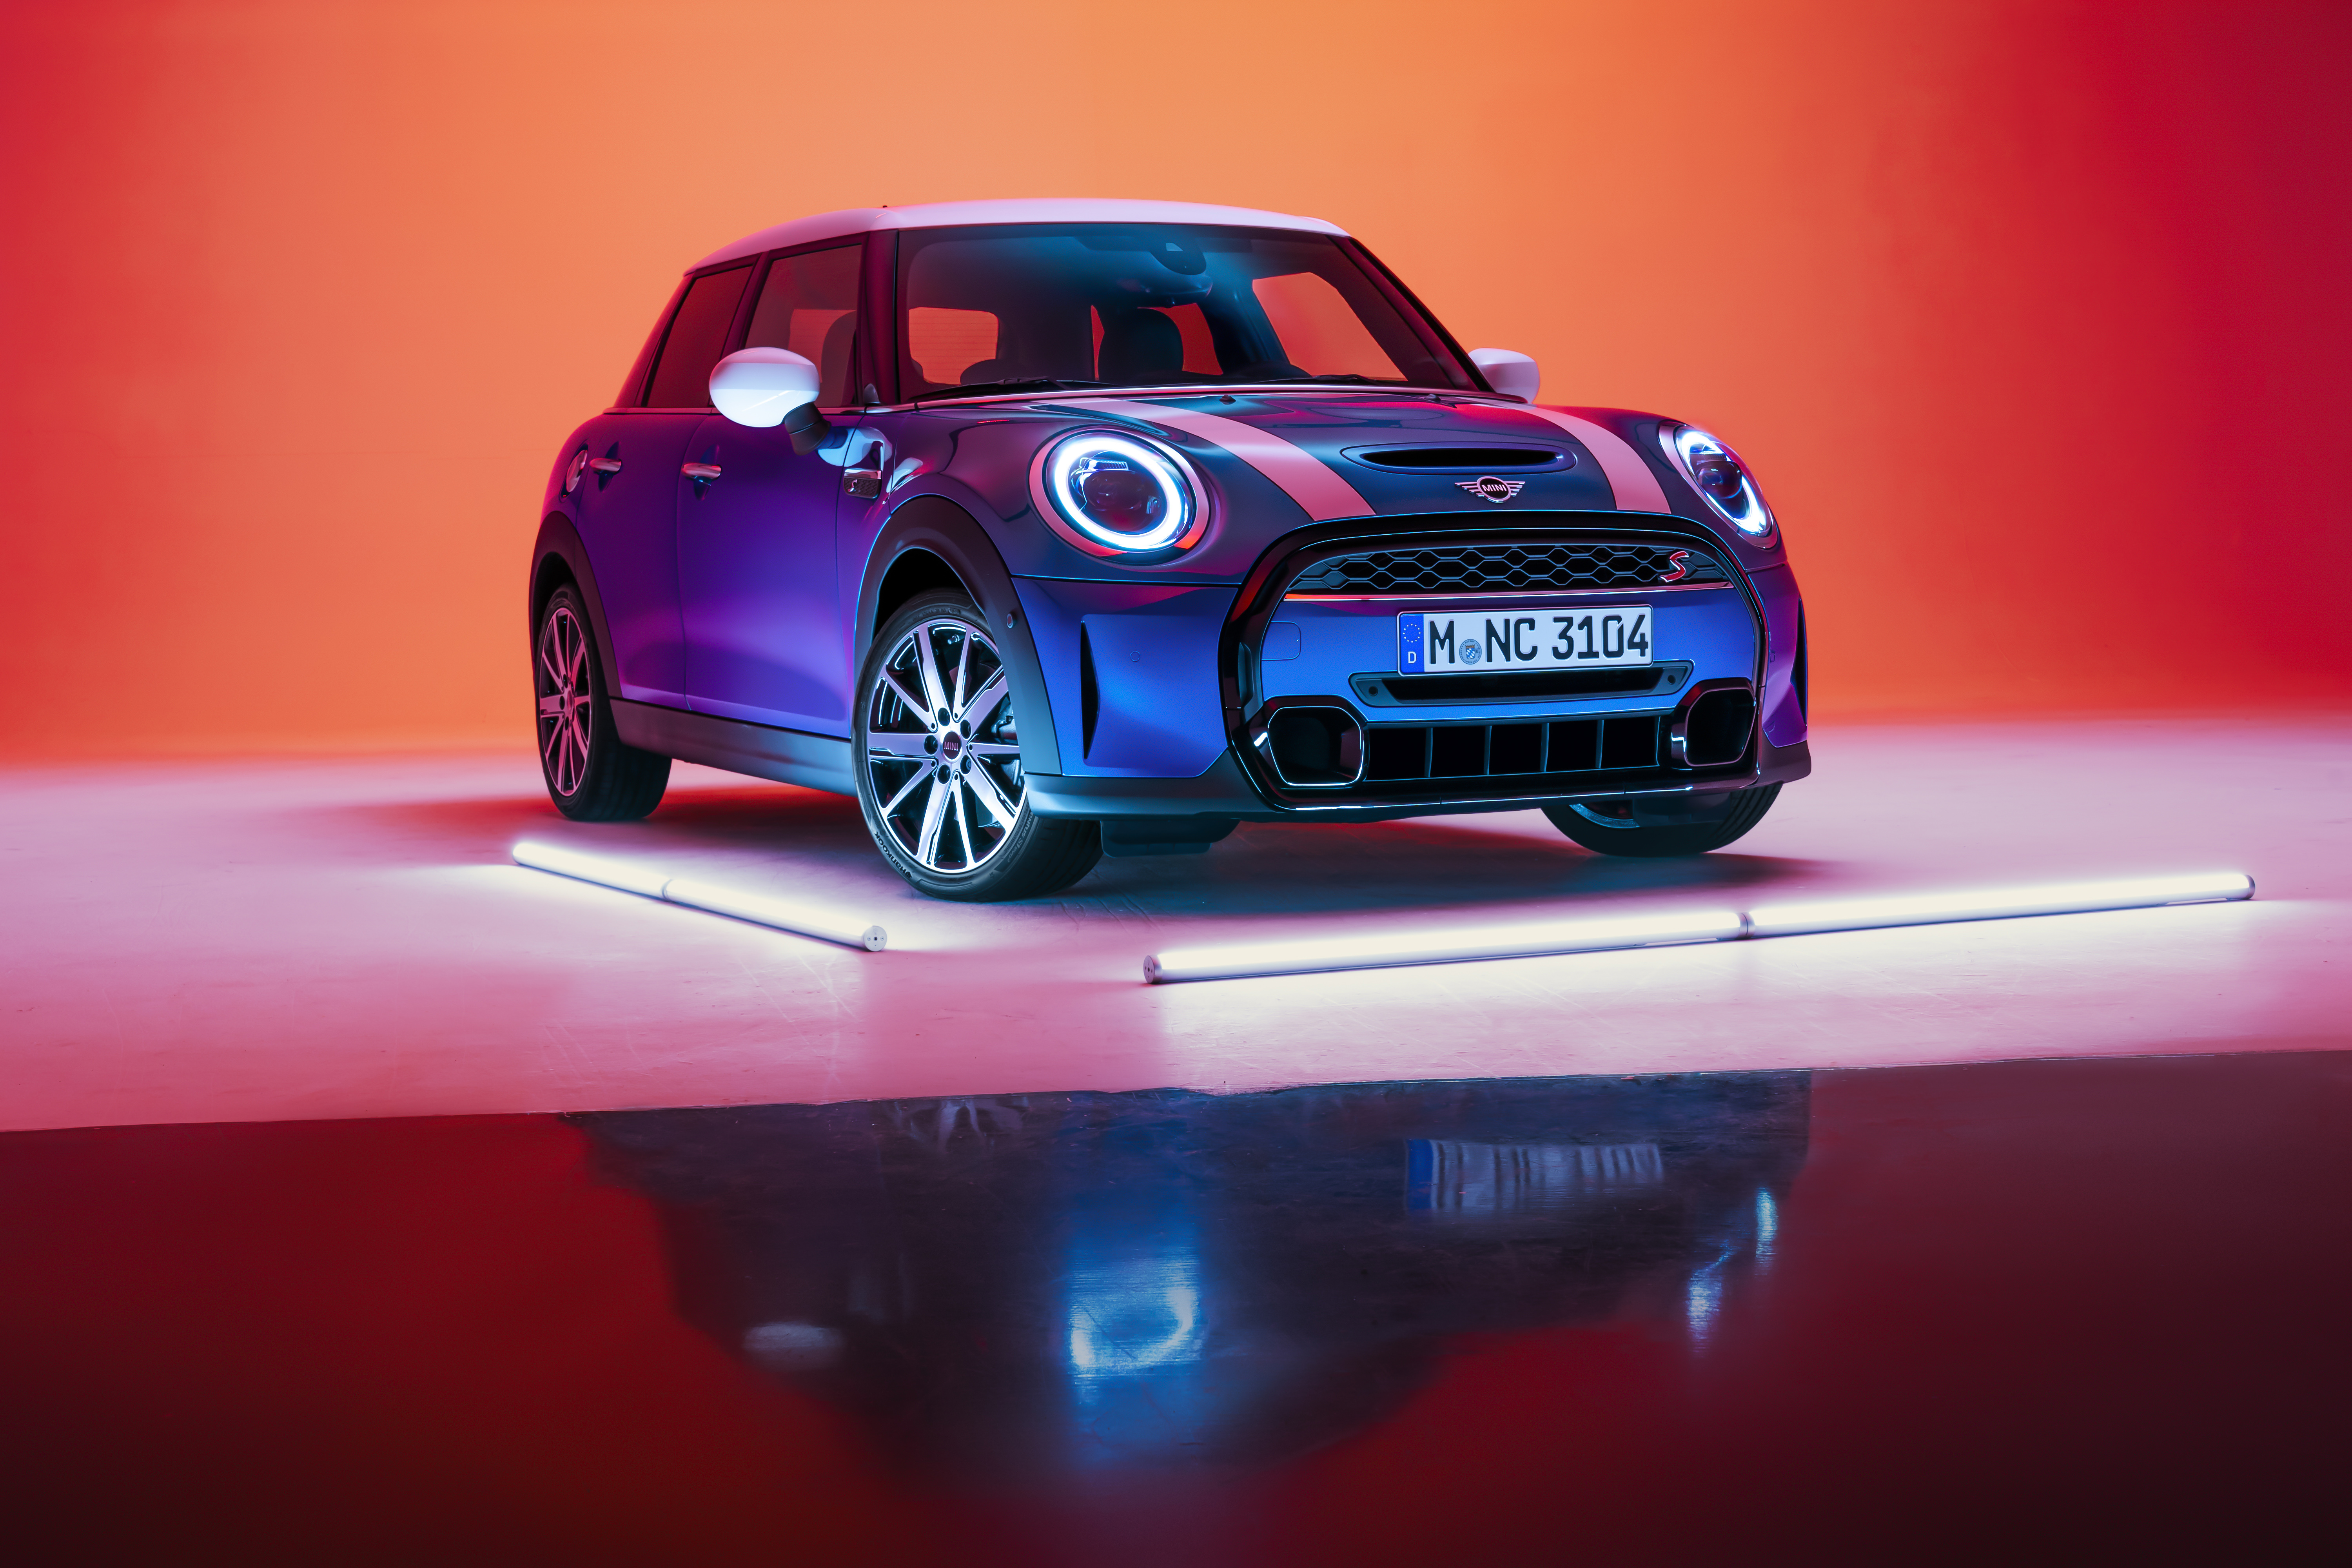 The all-new 2022 Mini Cooper S Hardtop is turning heads